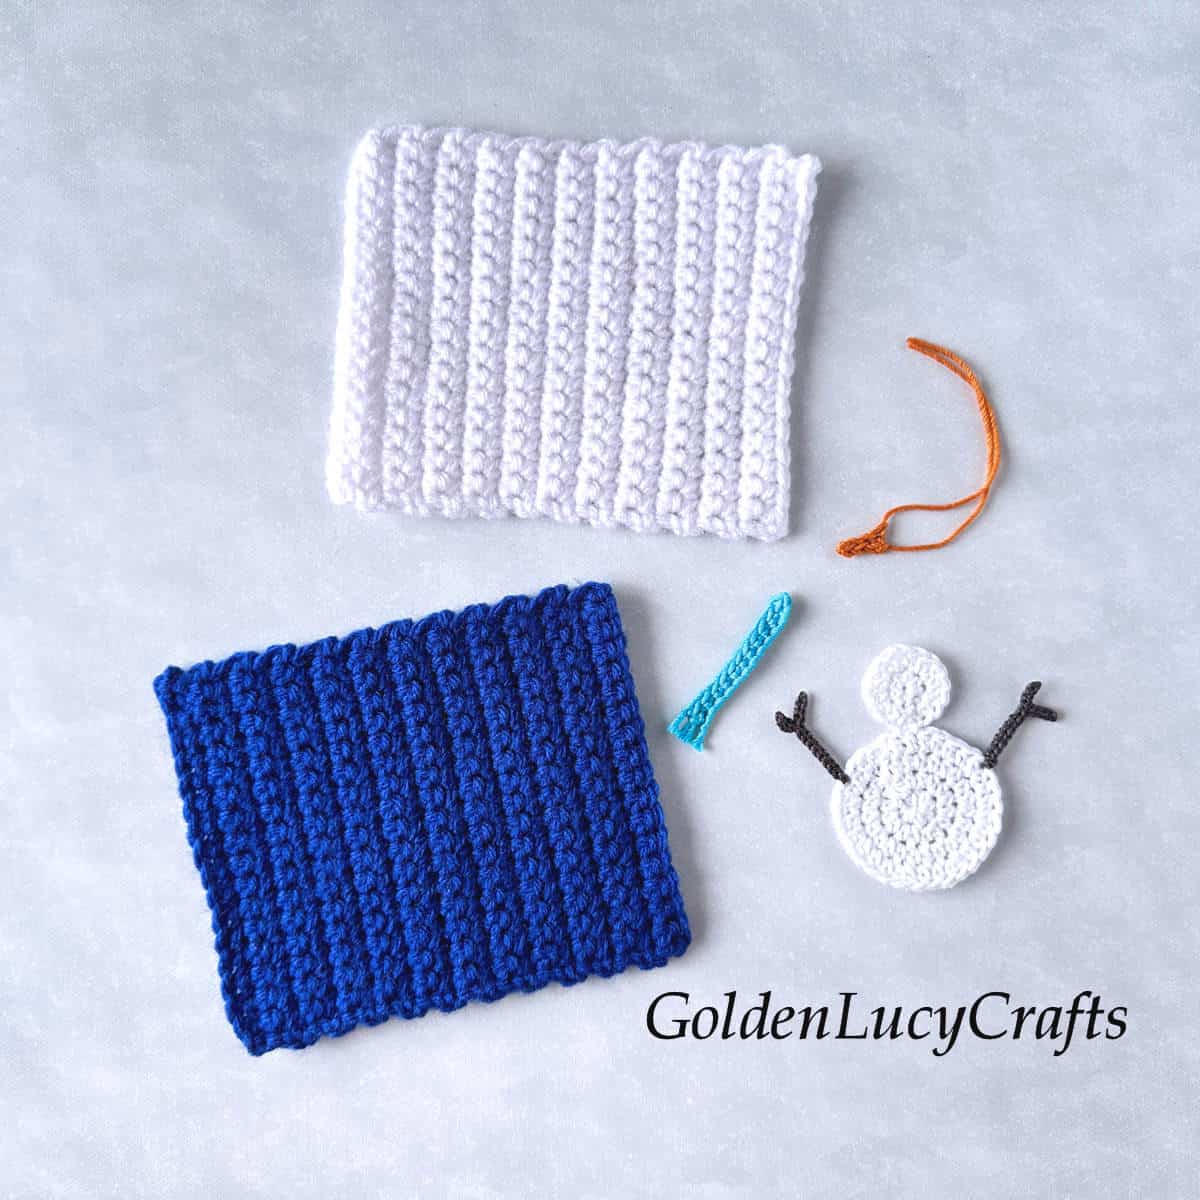 Crocheted white and blue rectangulars and parts of snowman applique.